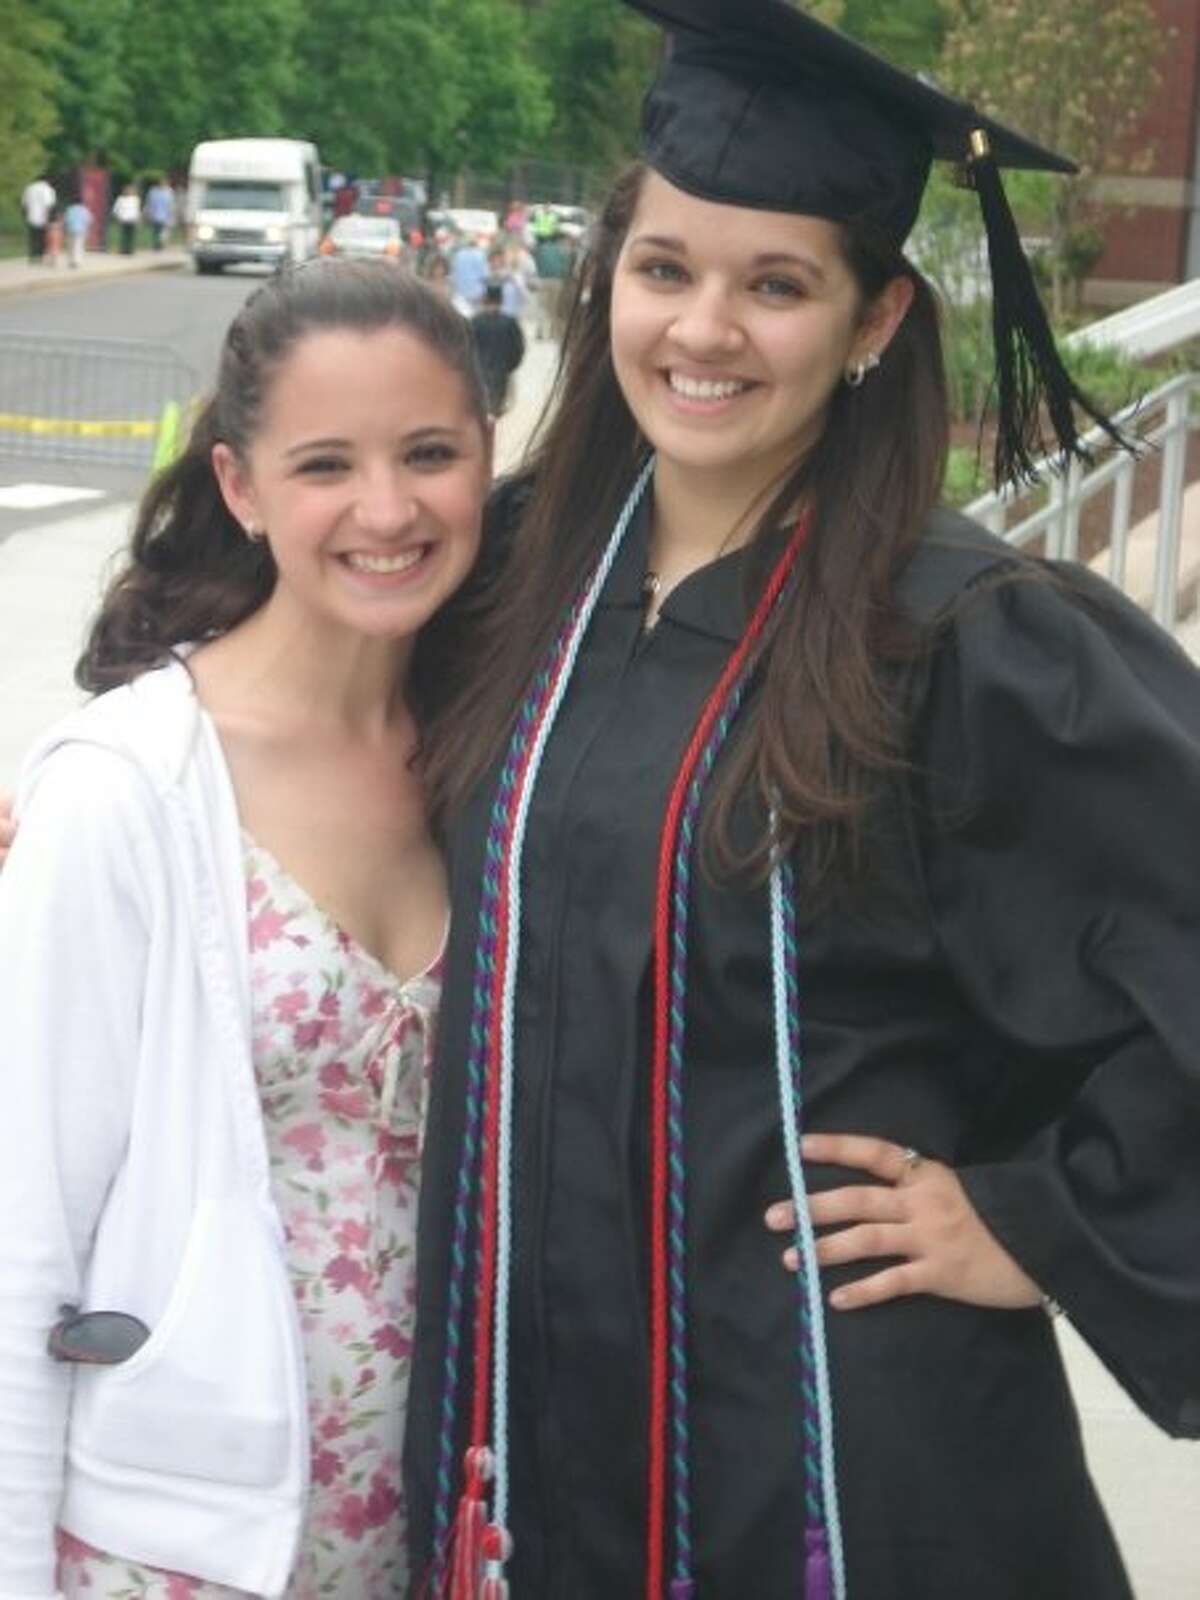 Jillian and Victoria Soto, a first-grade teacher who was killed in the Sandy Hook Elementary School massacre on Dec. 14, 2012.